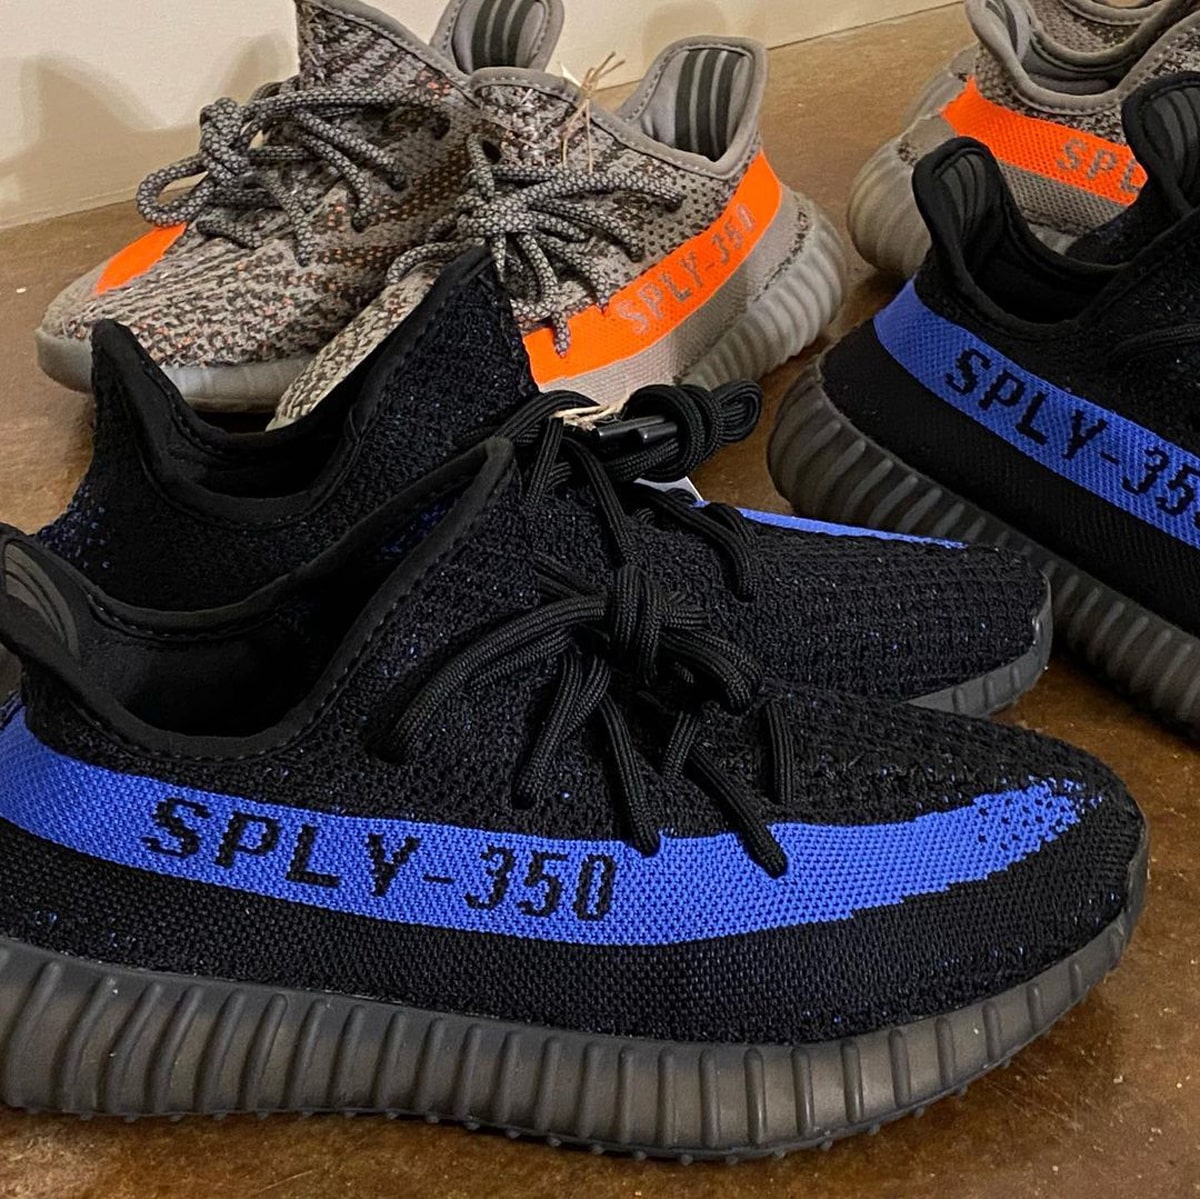 adidas Yeezy Boost 350 V2 Dazzling Blue GY7164 Release Date